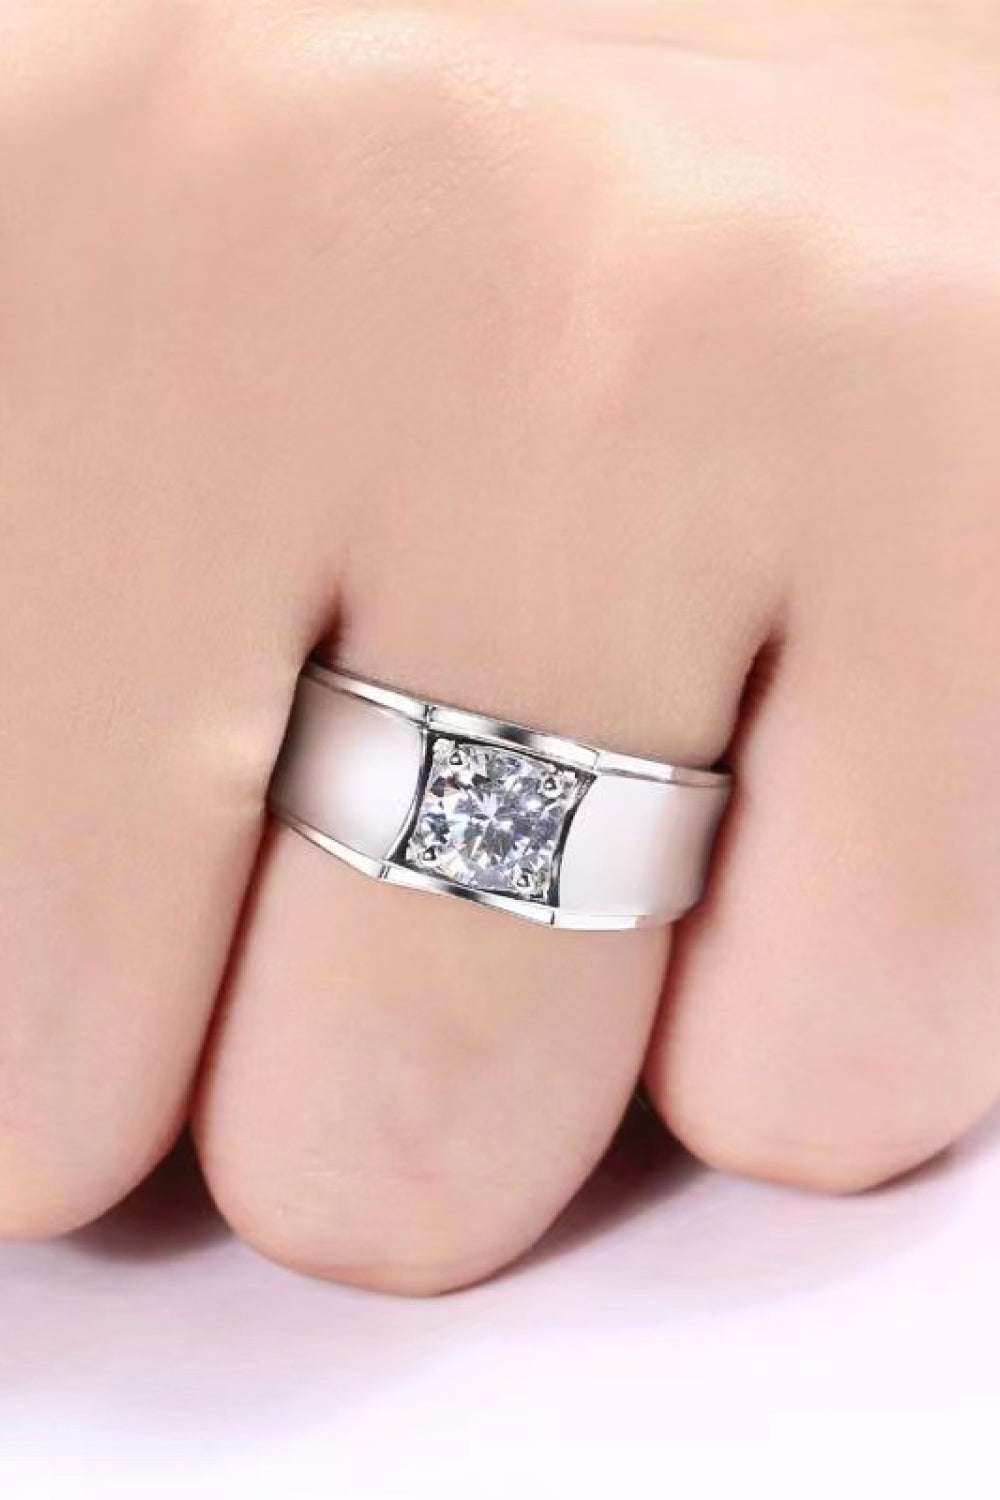 1 Carat Round Brilliant Cut Moissanite Wide Band Ring (Platinum Over Pure Sterling Silver) - Sparkala